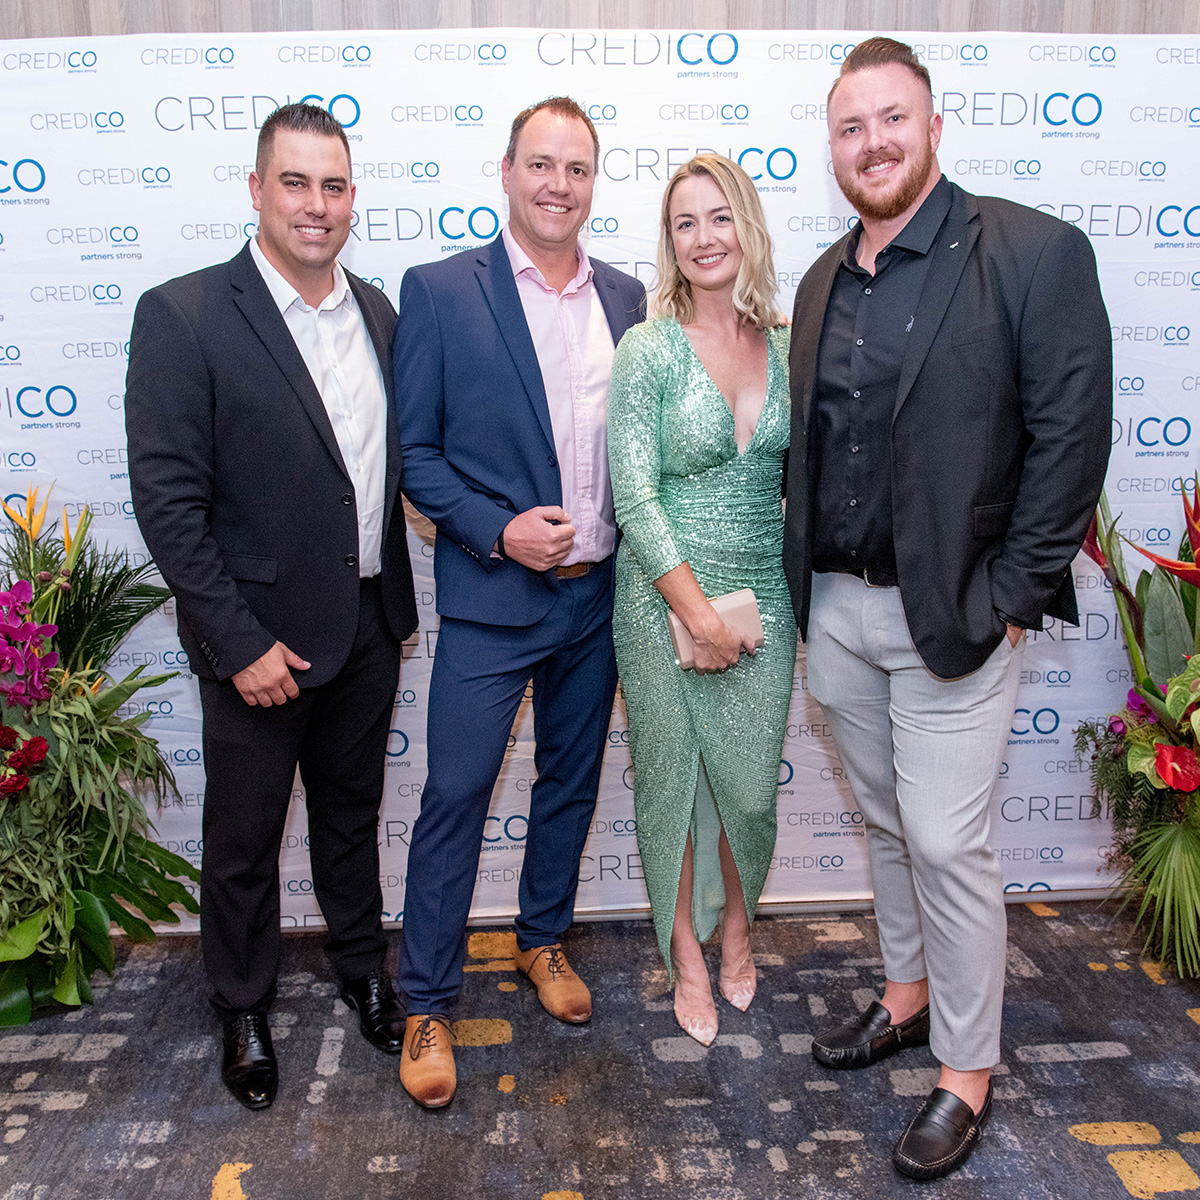 Four smiling attendees pose in front of a Credico-branded backdrop before Credico South Africa's 2023 Awards Gala at Sun City Resort.